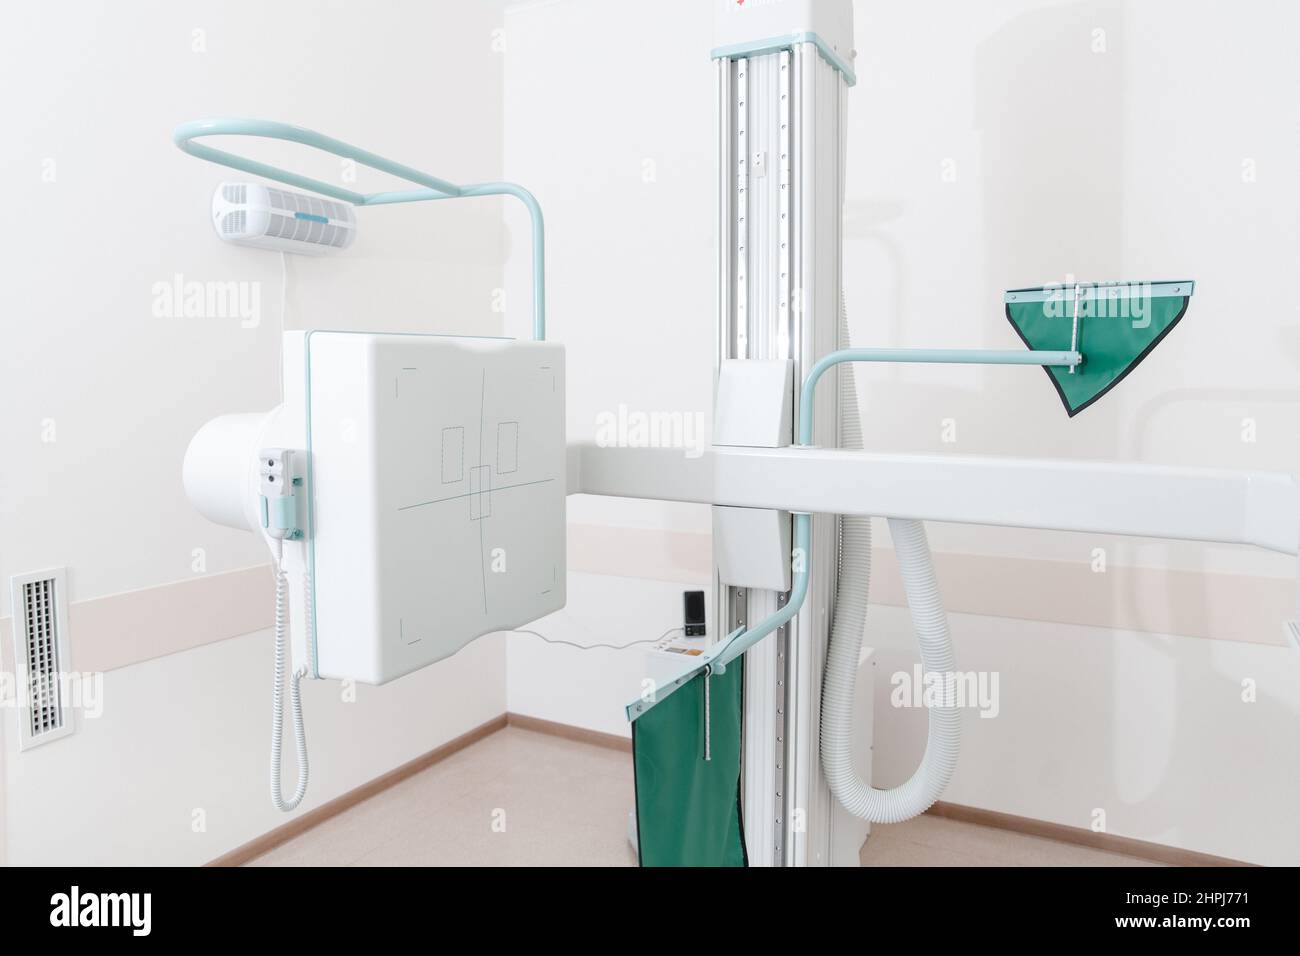 Hospital Radiology Room. X-ray department in modern hospital. Medical equipment. scan machine for fluorography. Technician adjusting an xray machine Stock Photo